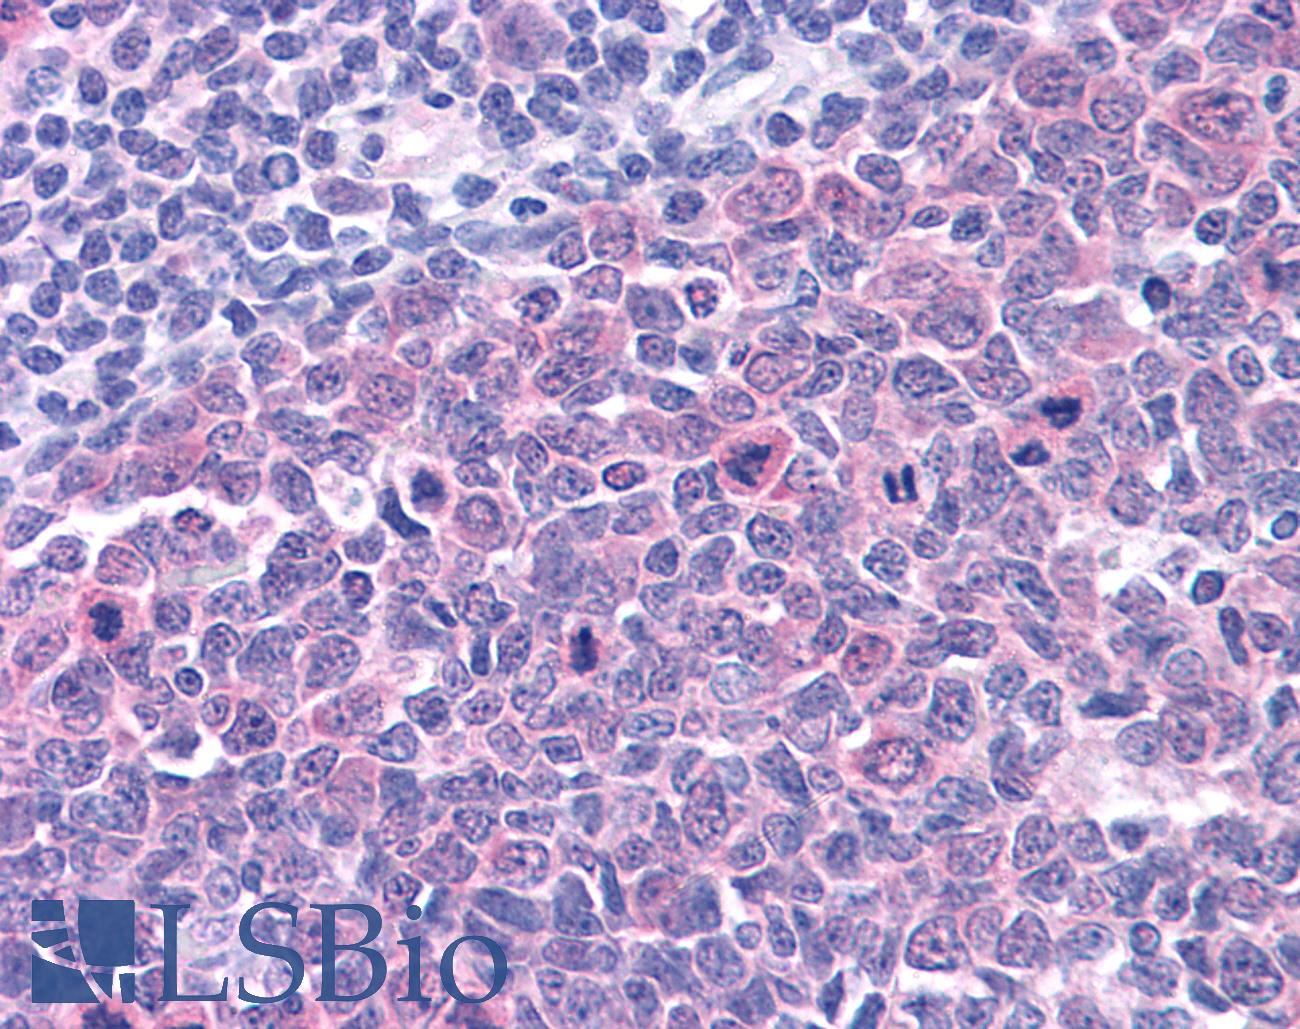 SMARCA4 / BRG1 Antibody - Anti-SMARCA4 / BRG1 antibody IHC of human tonsil. Immunohistochemistry of formalin-fixed, paraffin-embedded tissue after heat-induced antigen retrieval. Antibody concentration 10 ug/ml.